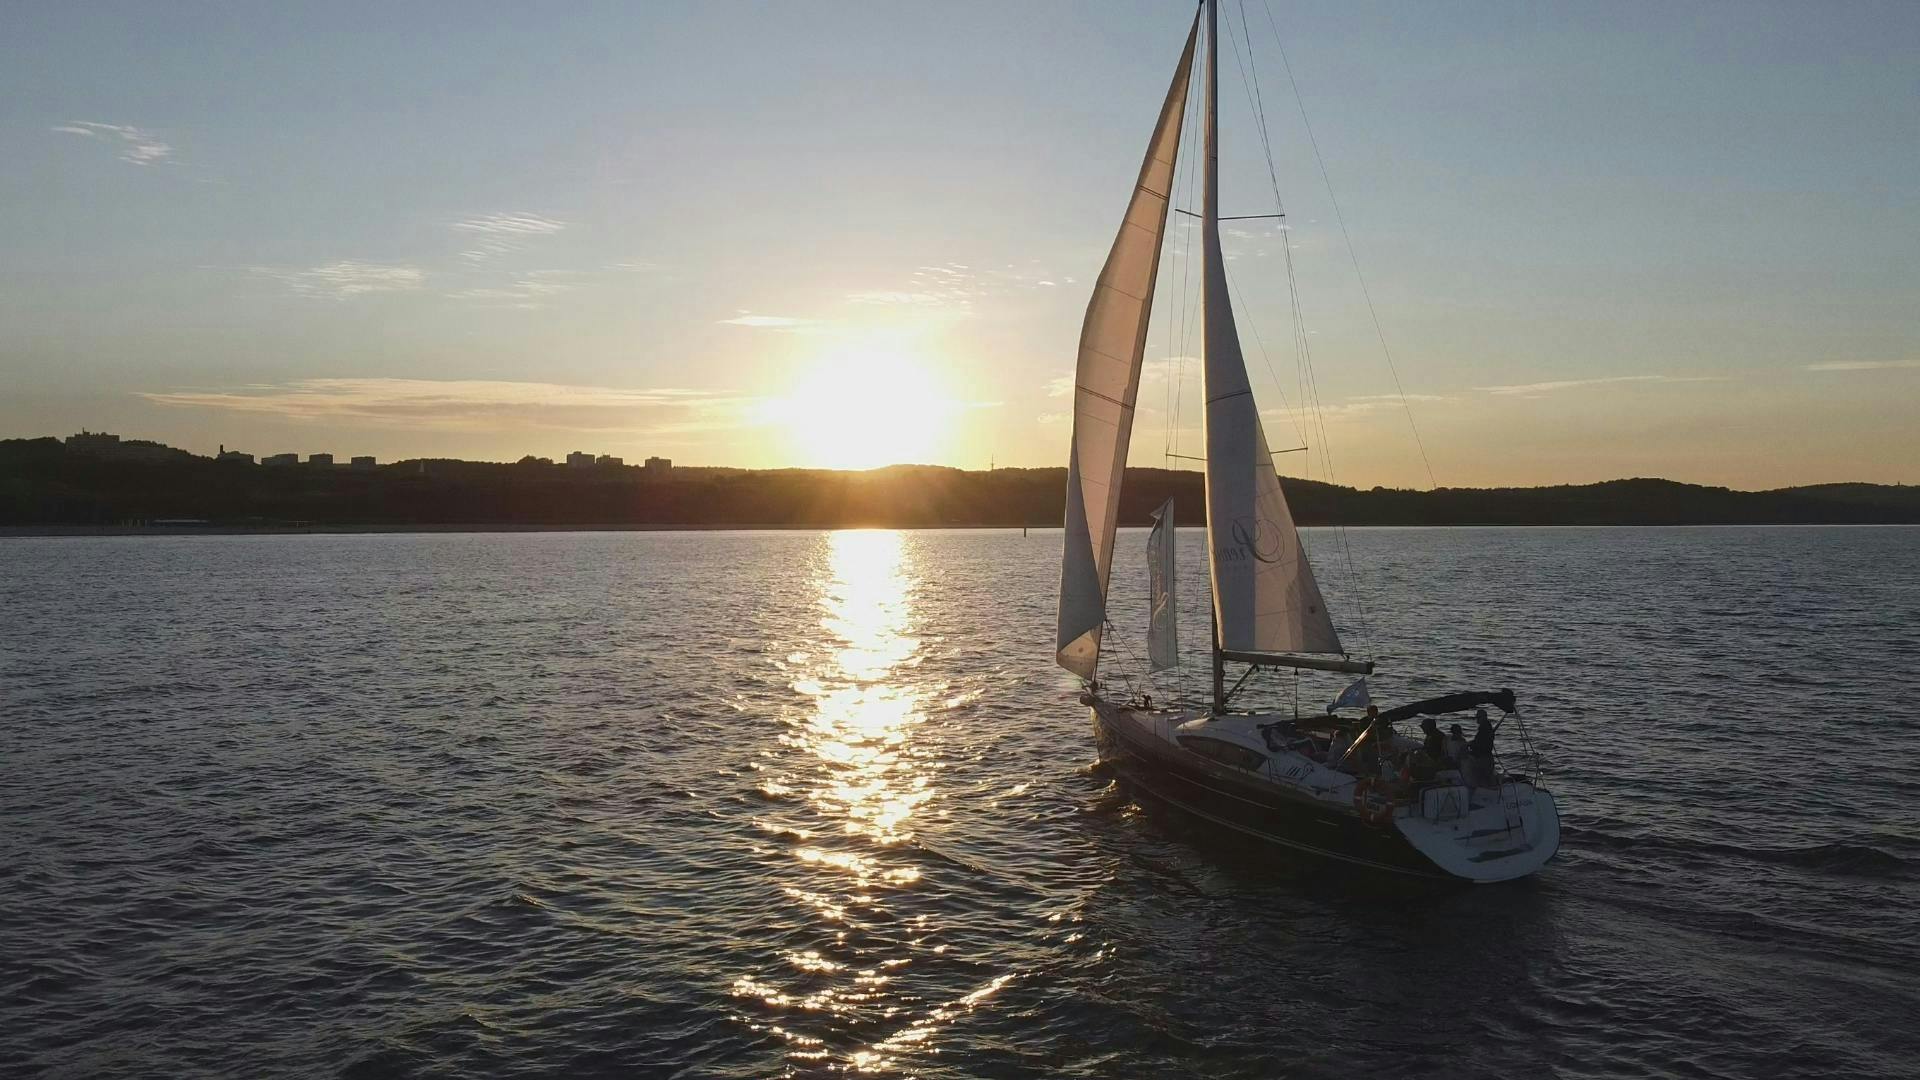 Sunset Yacht Cruise from Sopot